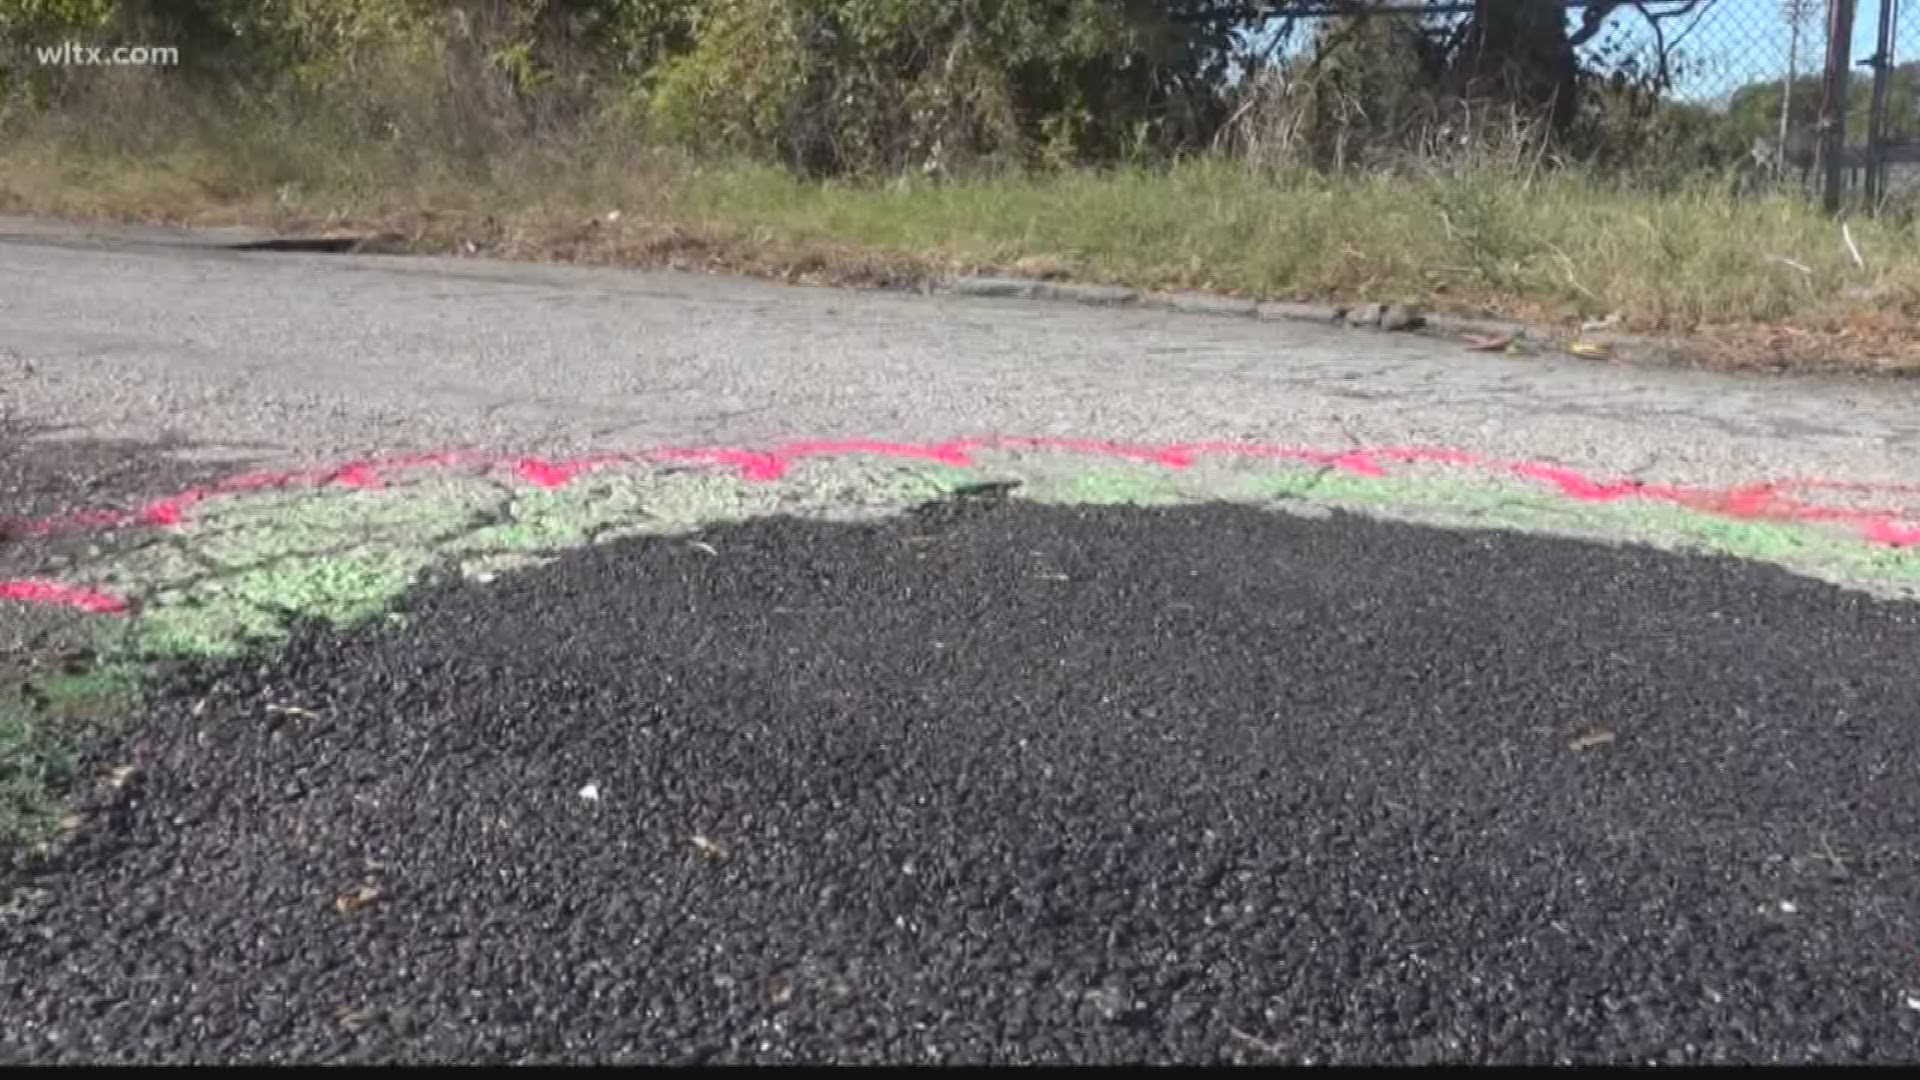 We reached out to SCDOT yesterday and they quickly came out and repaired the hole in the road leaving just the remnants of the neighborhood display.